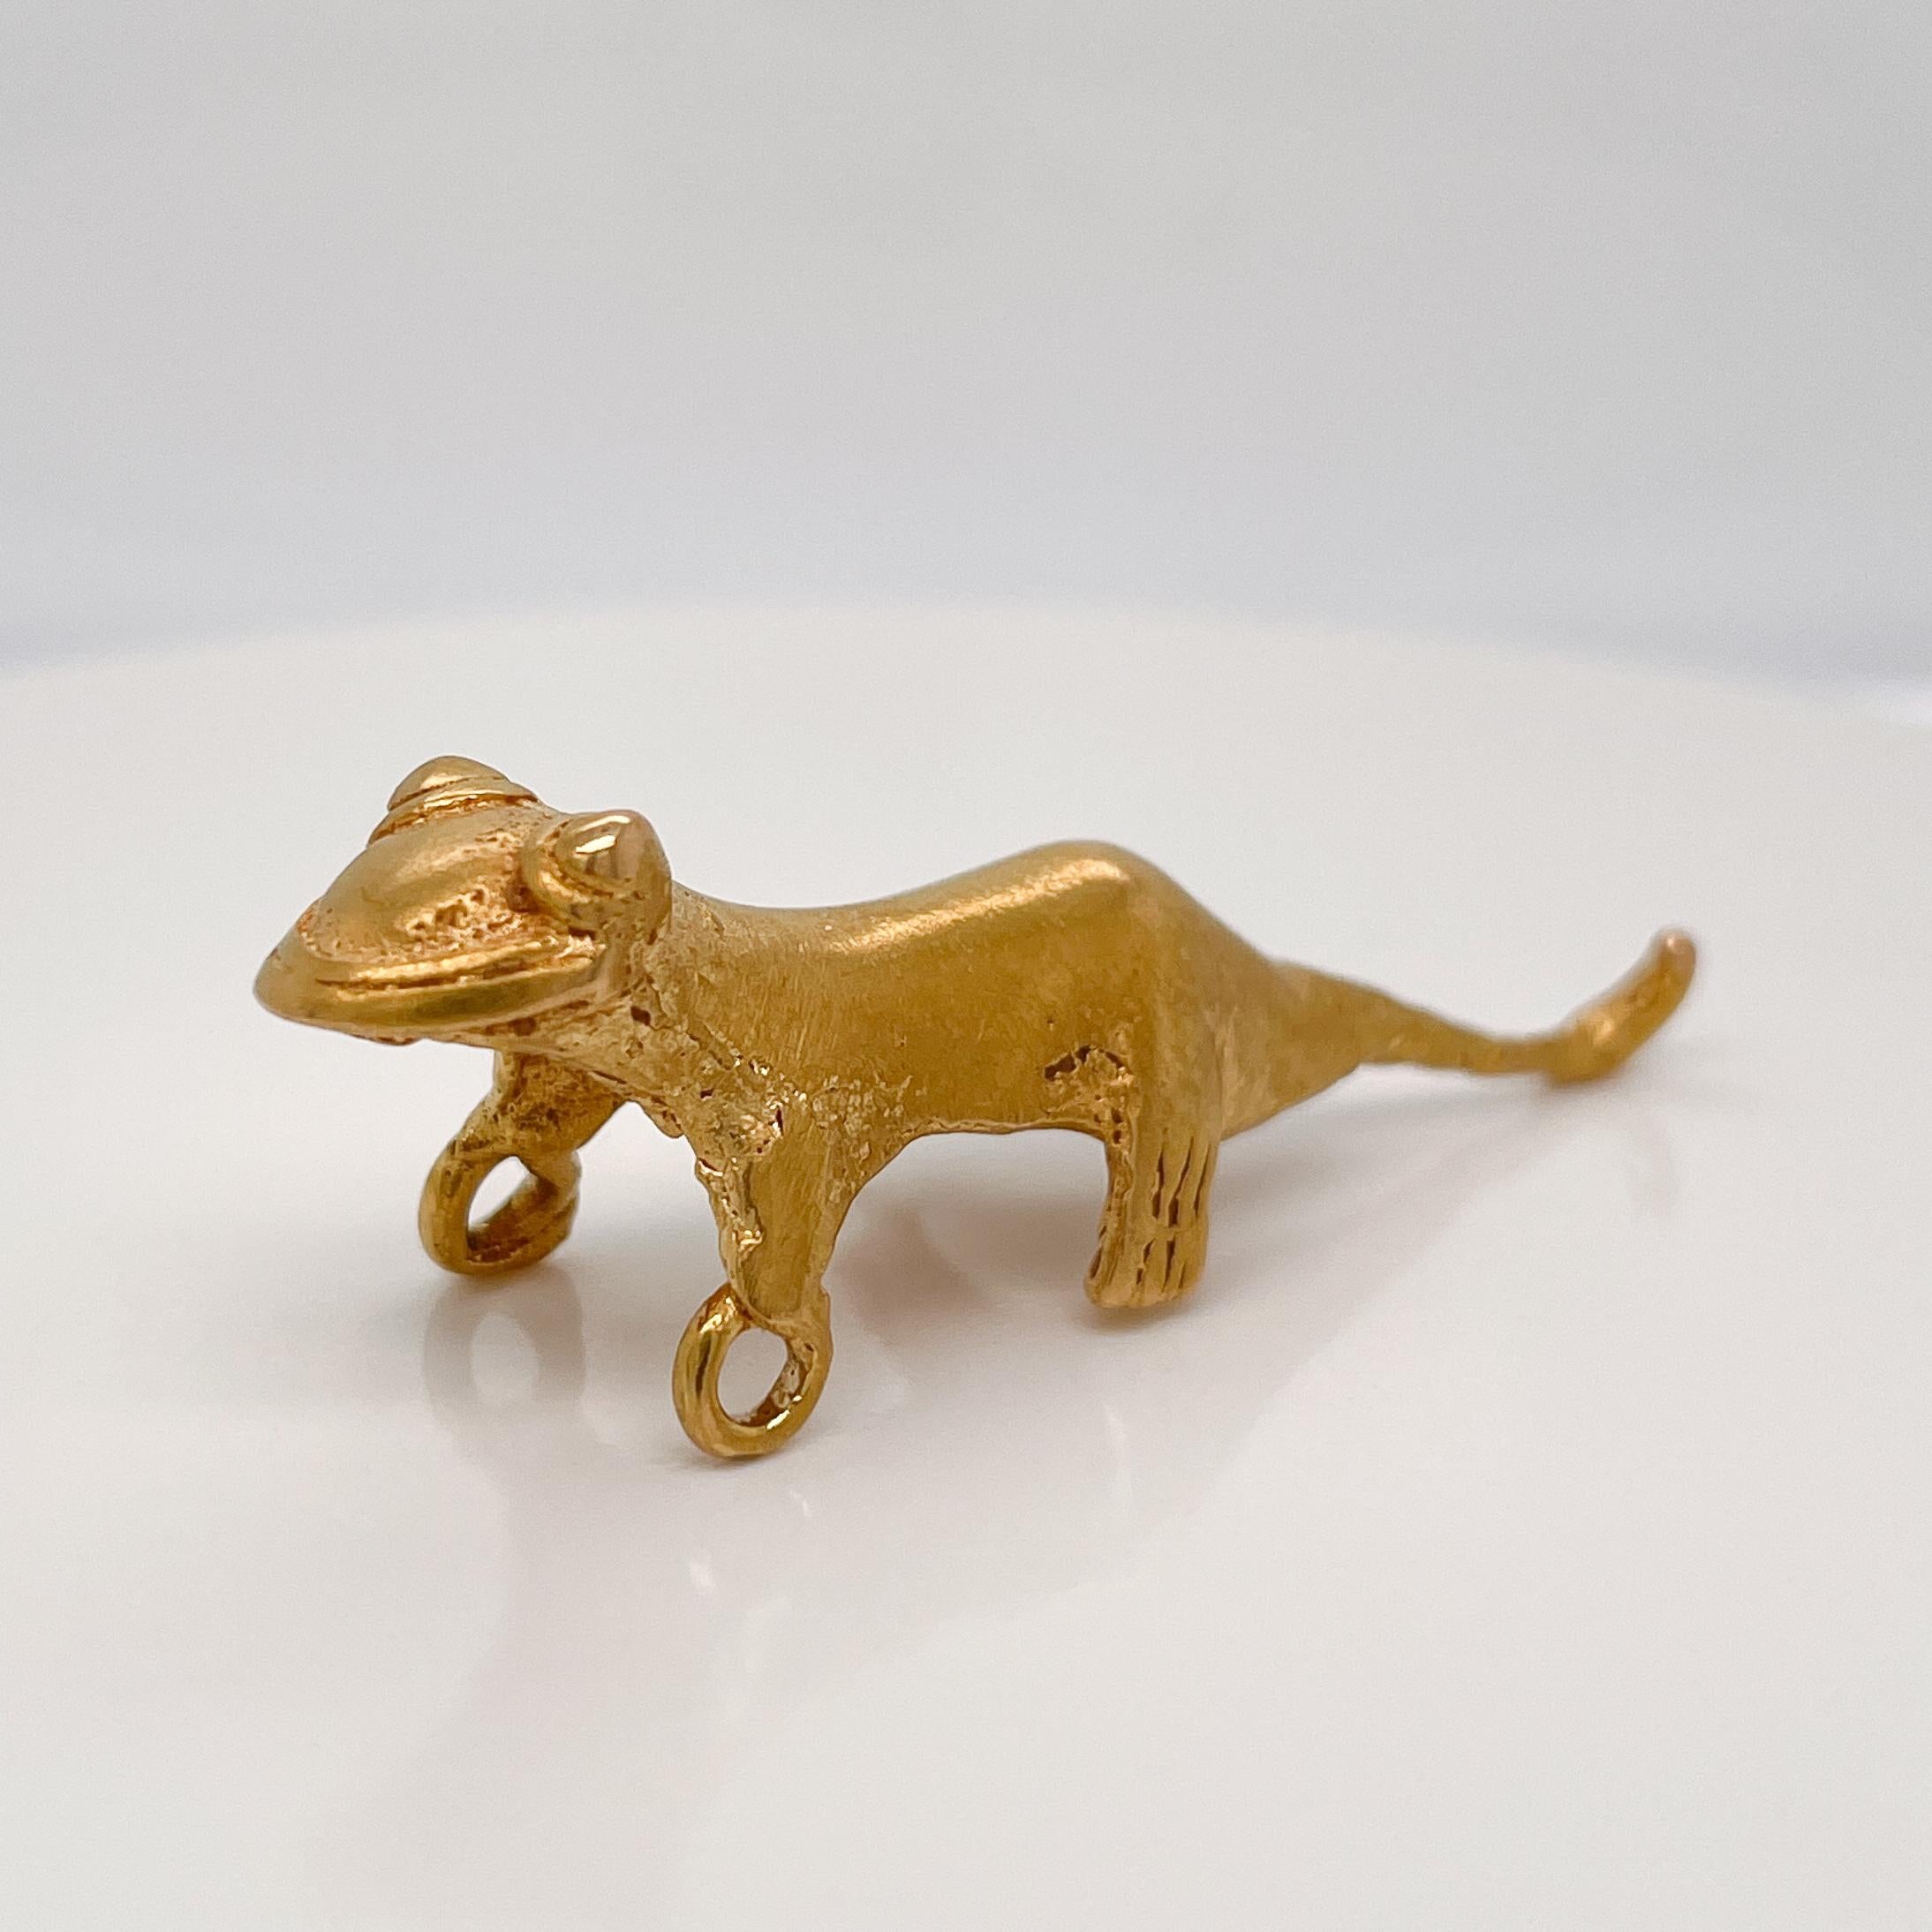 A very fine Pre-Columbian gold pendant.

In the form of a gecko or lizard with bulging eyes and a long tail.

With integral bails in each hand.

A wonderful figural Pre-Columbian pendant!

Provenance: From a private Connecticut collection. Purchased